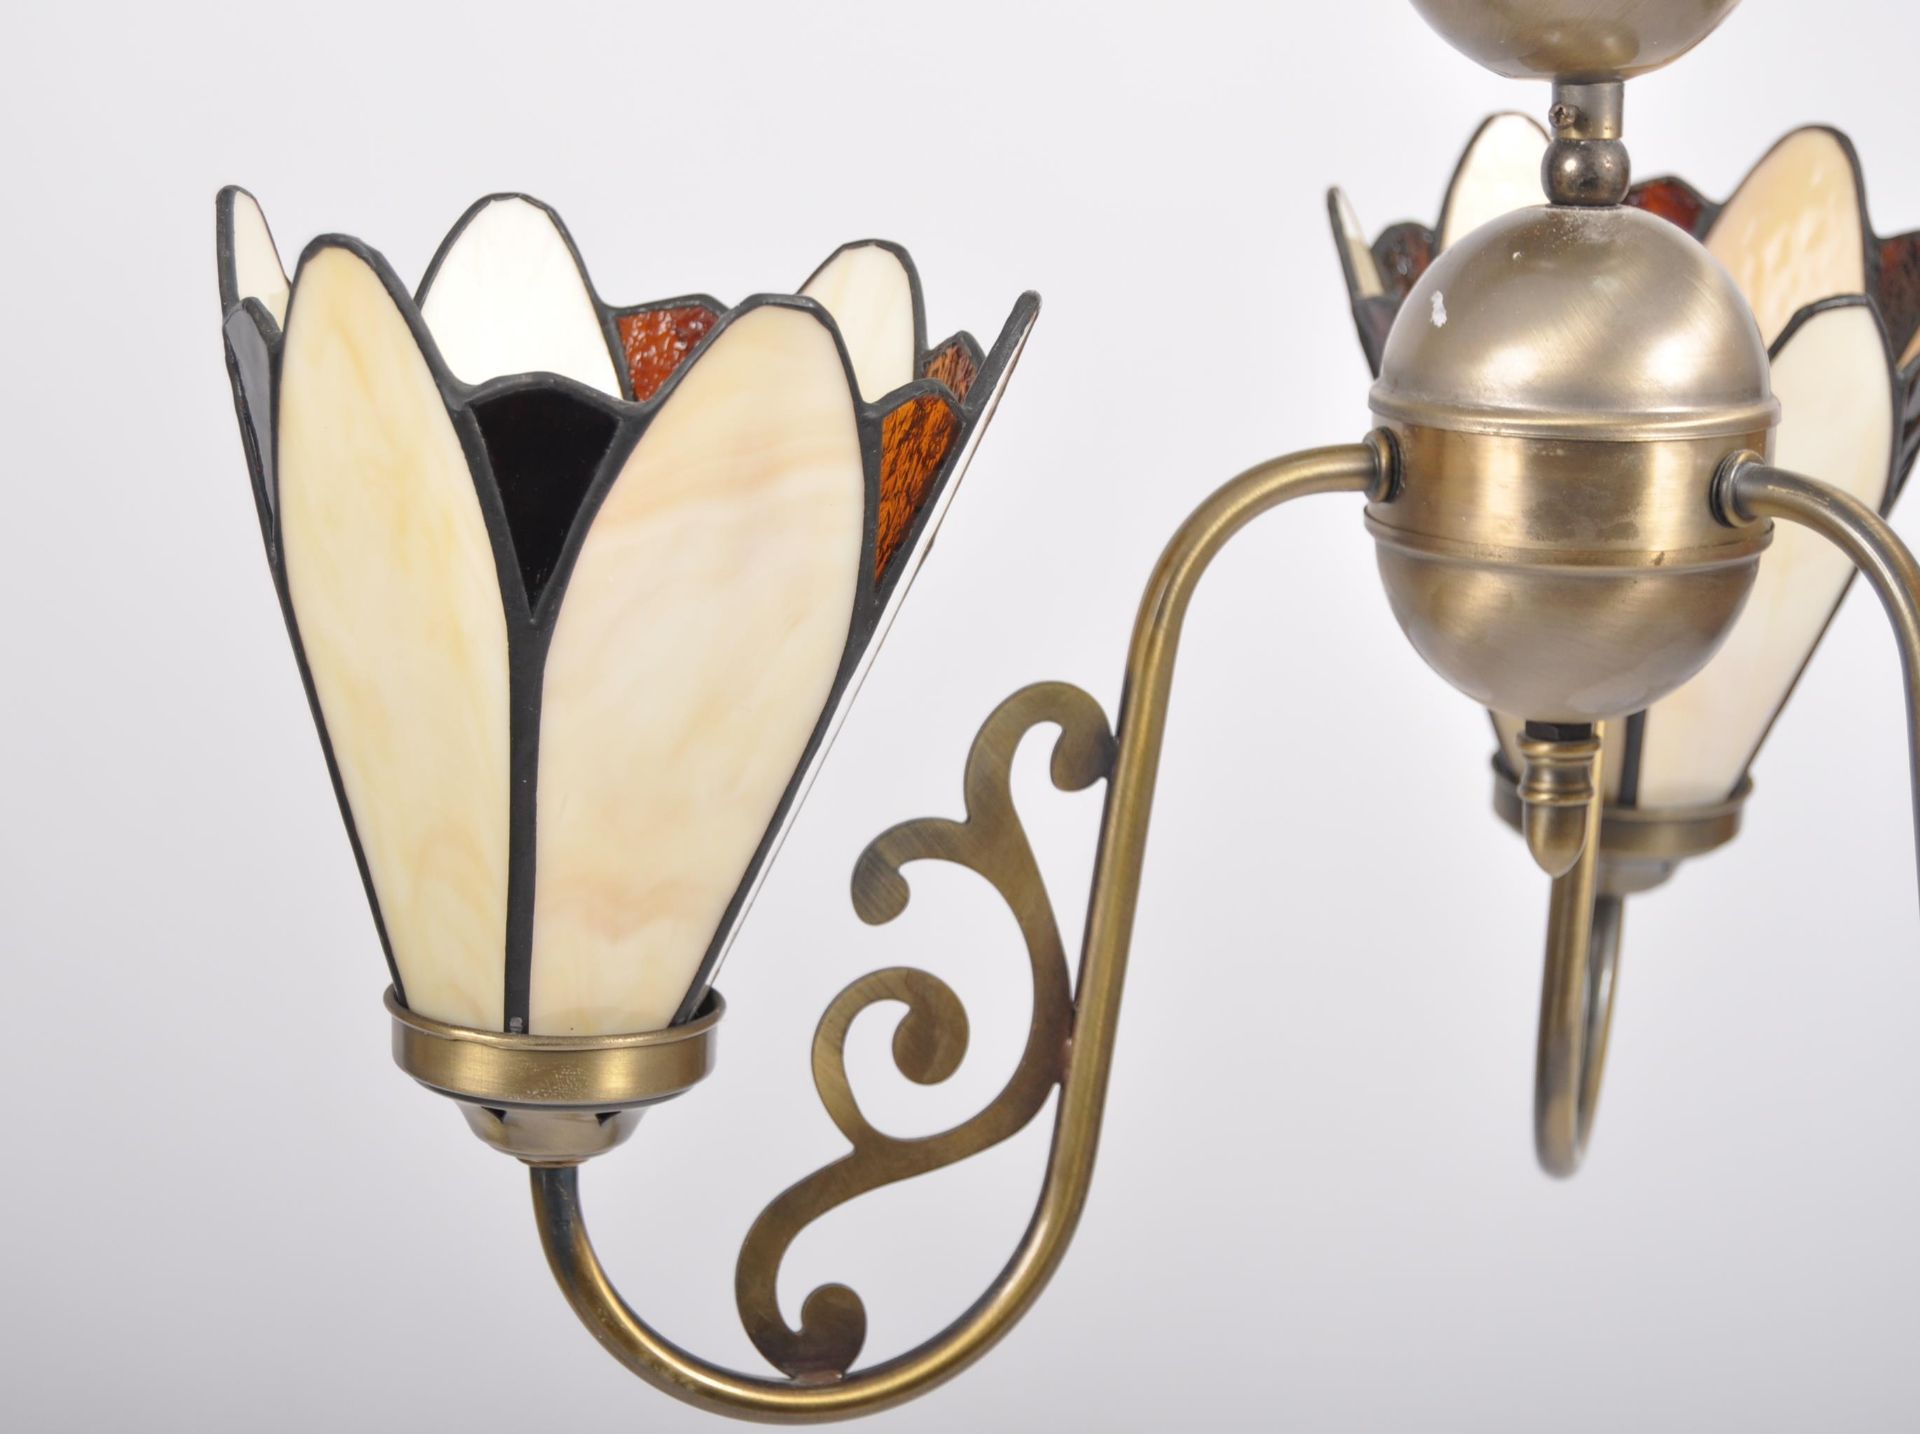 VINTAGE 20TH CENTURY TIFFANY STYLE CEILING LIGHT - Image 5 of 5